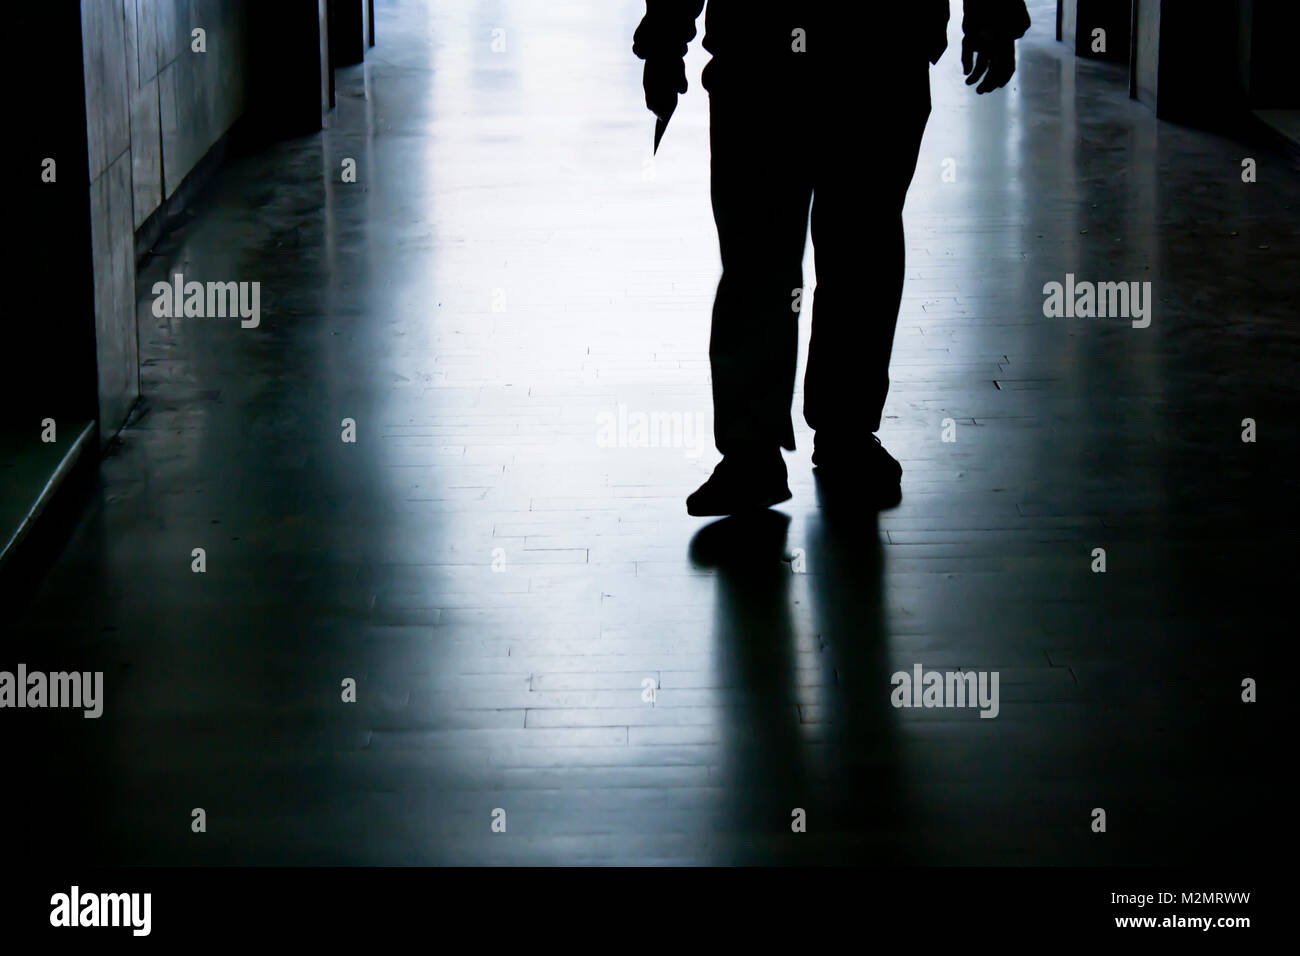 Blurry trap in dark alley in the night, silhouette of a man from waist down holding sharp object in hand while approaching Stock Photo